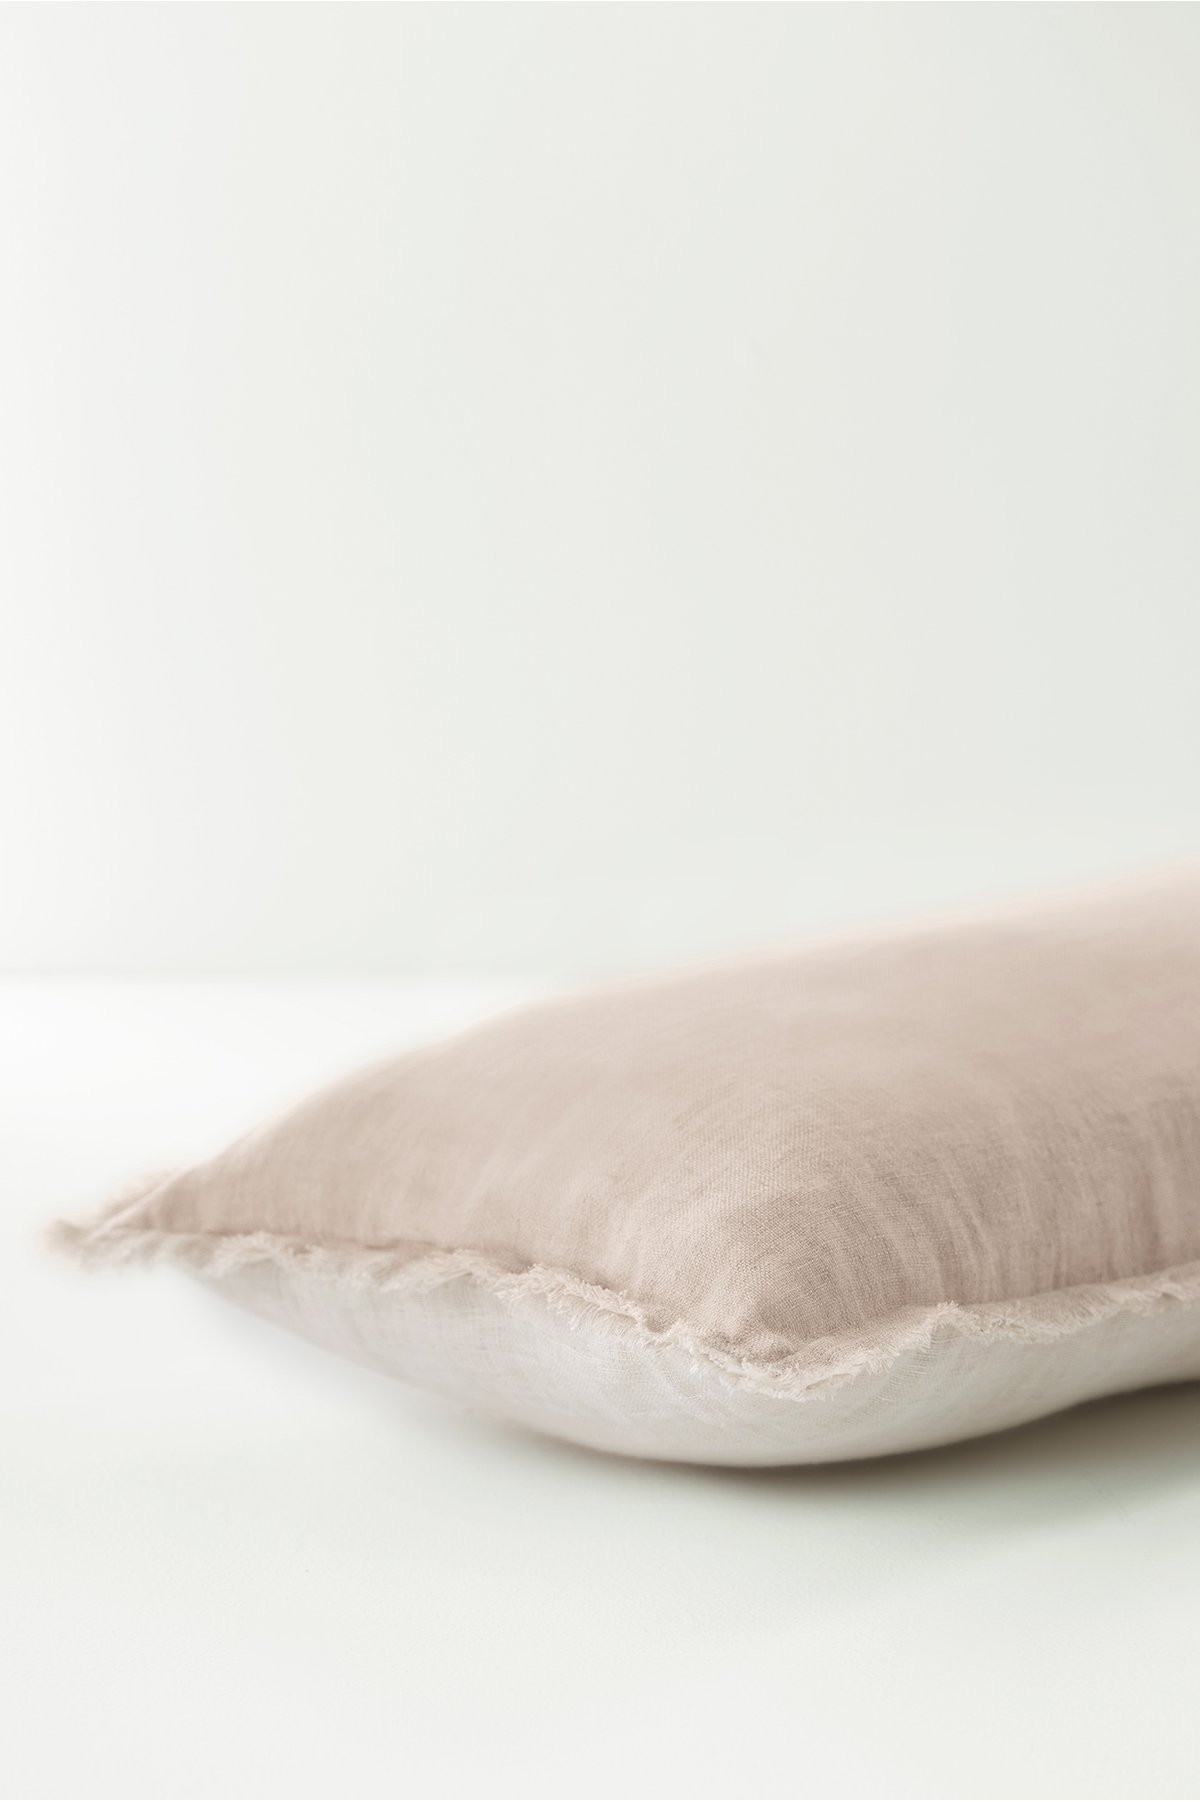 Adrina Long Bolster Pillow by Soft Surroundings, in Ivory